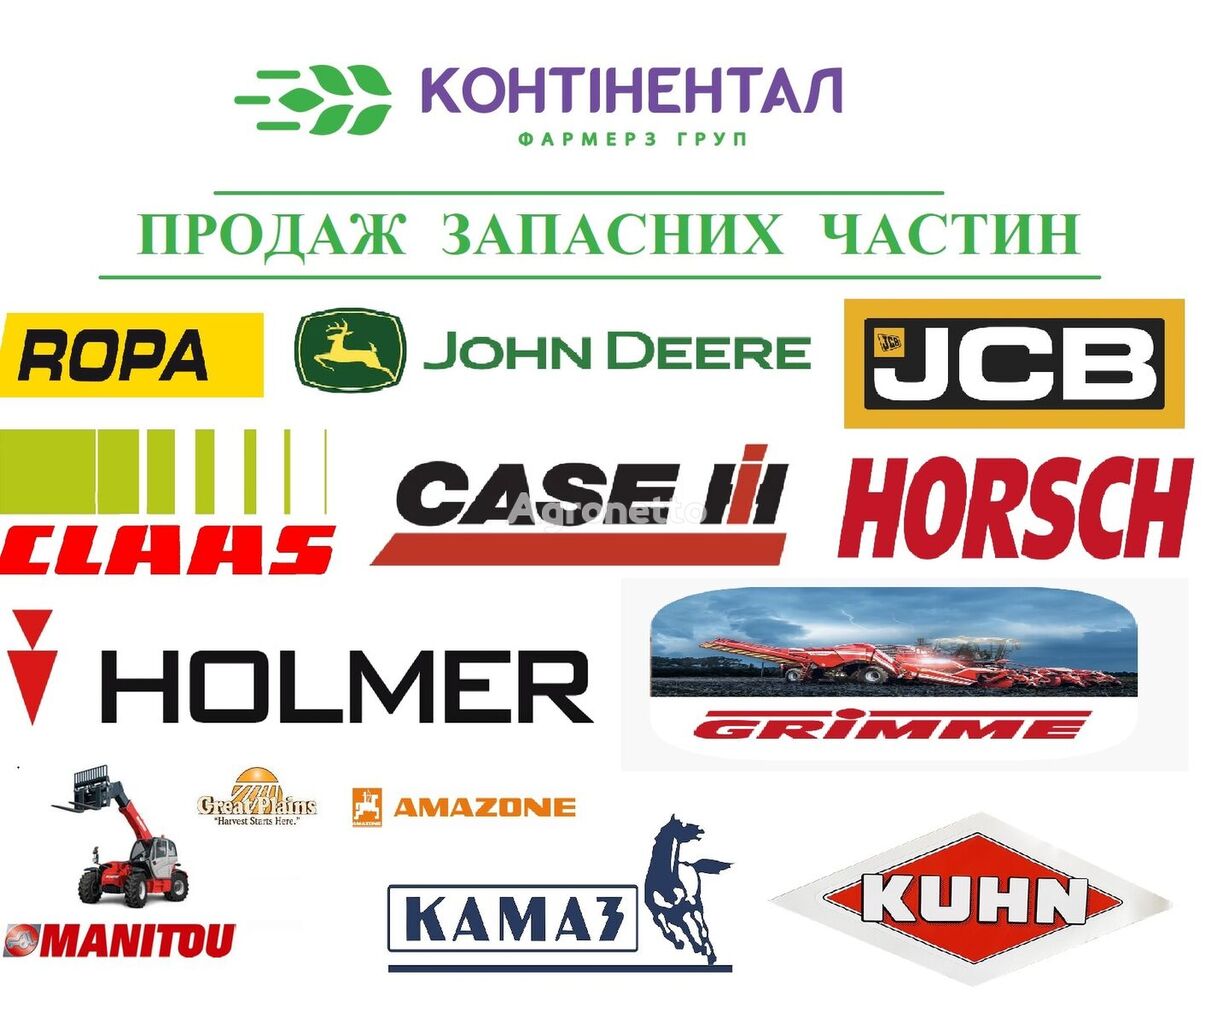 Pruzhyna 7mm 207004600 other operating parts for Ropa beet harvester